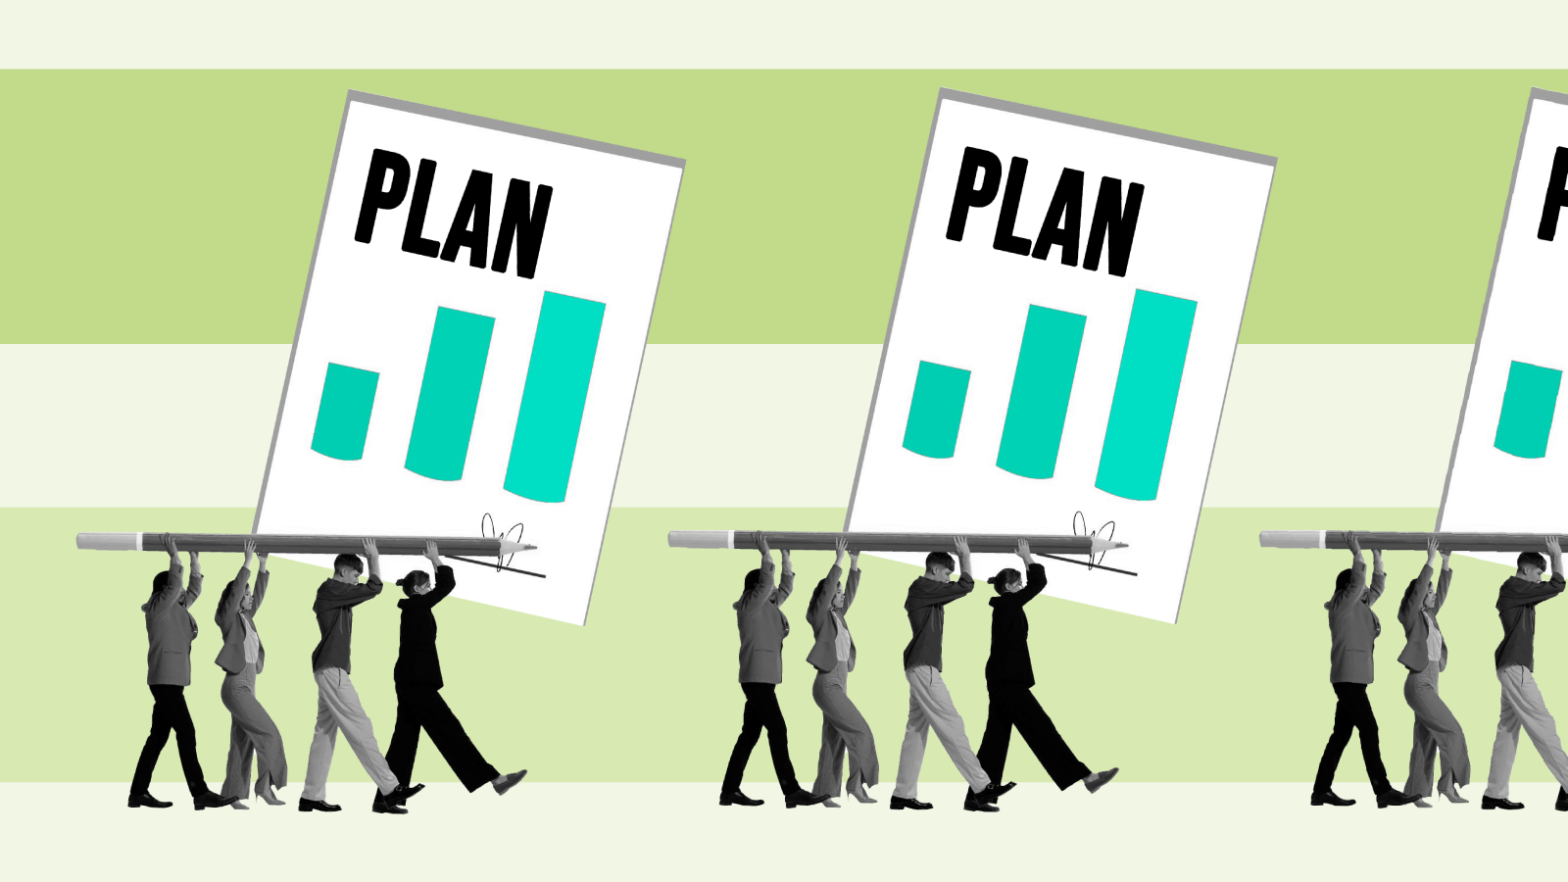 learning objectives for business plan